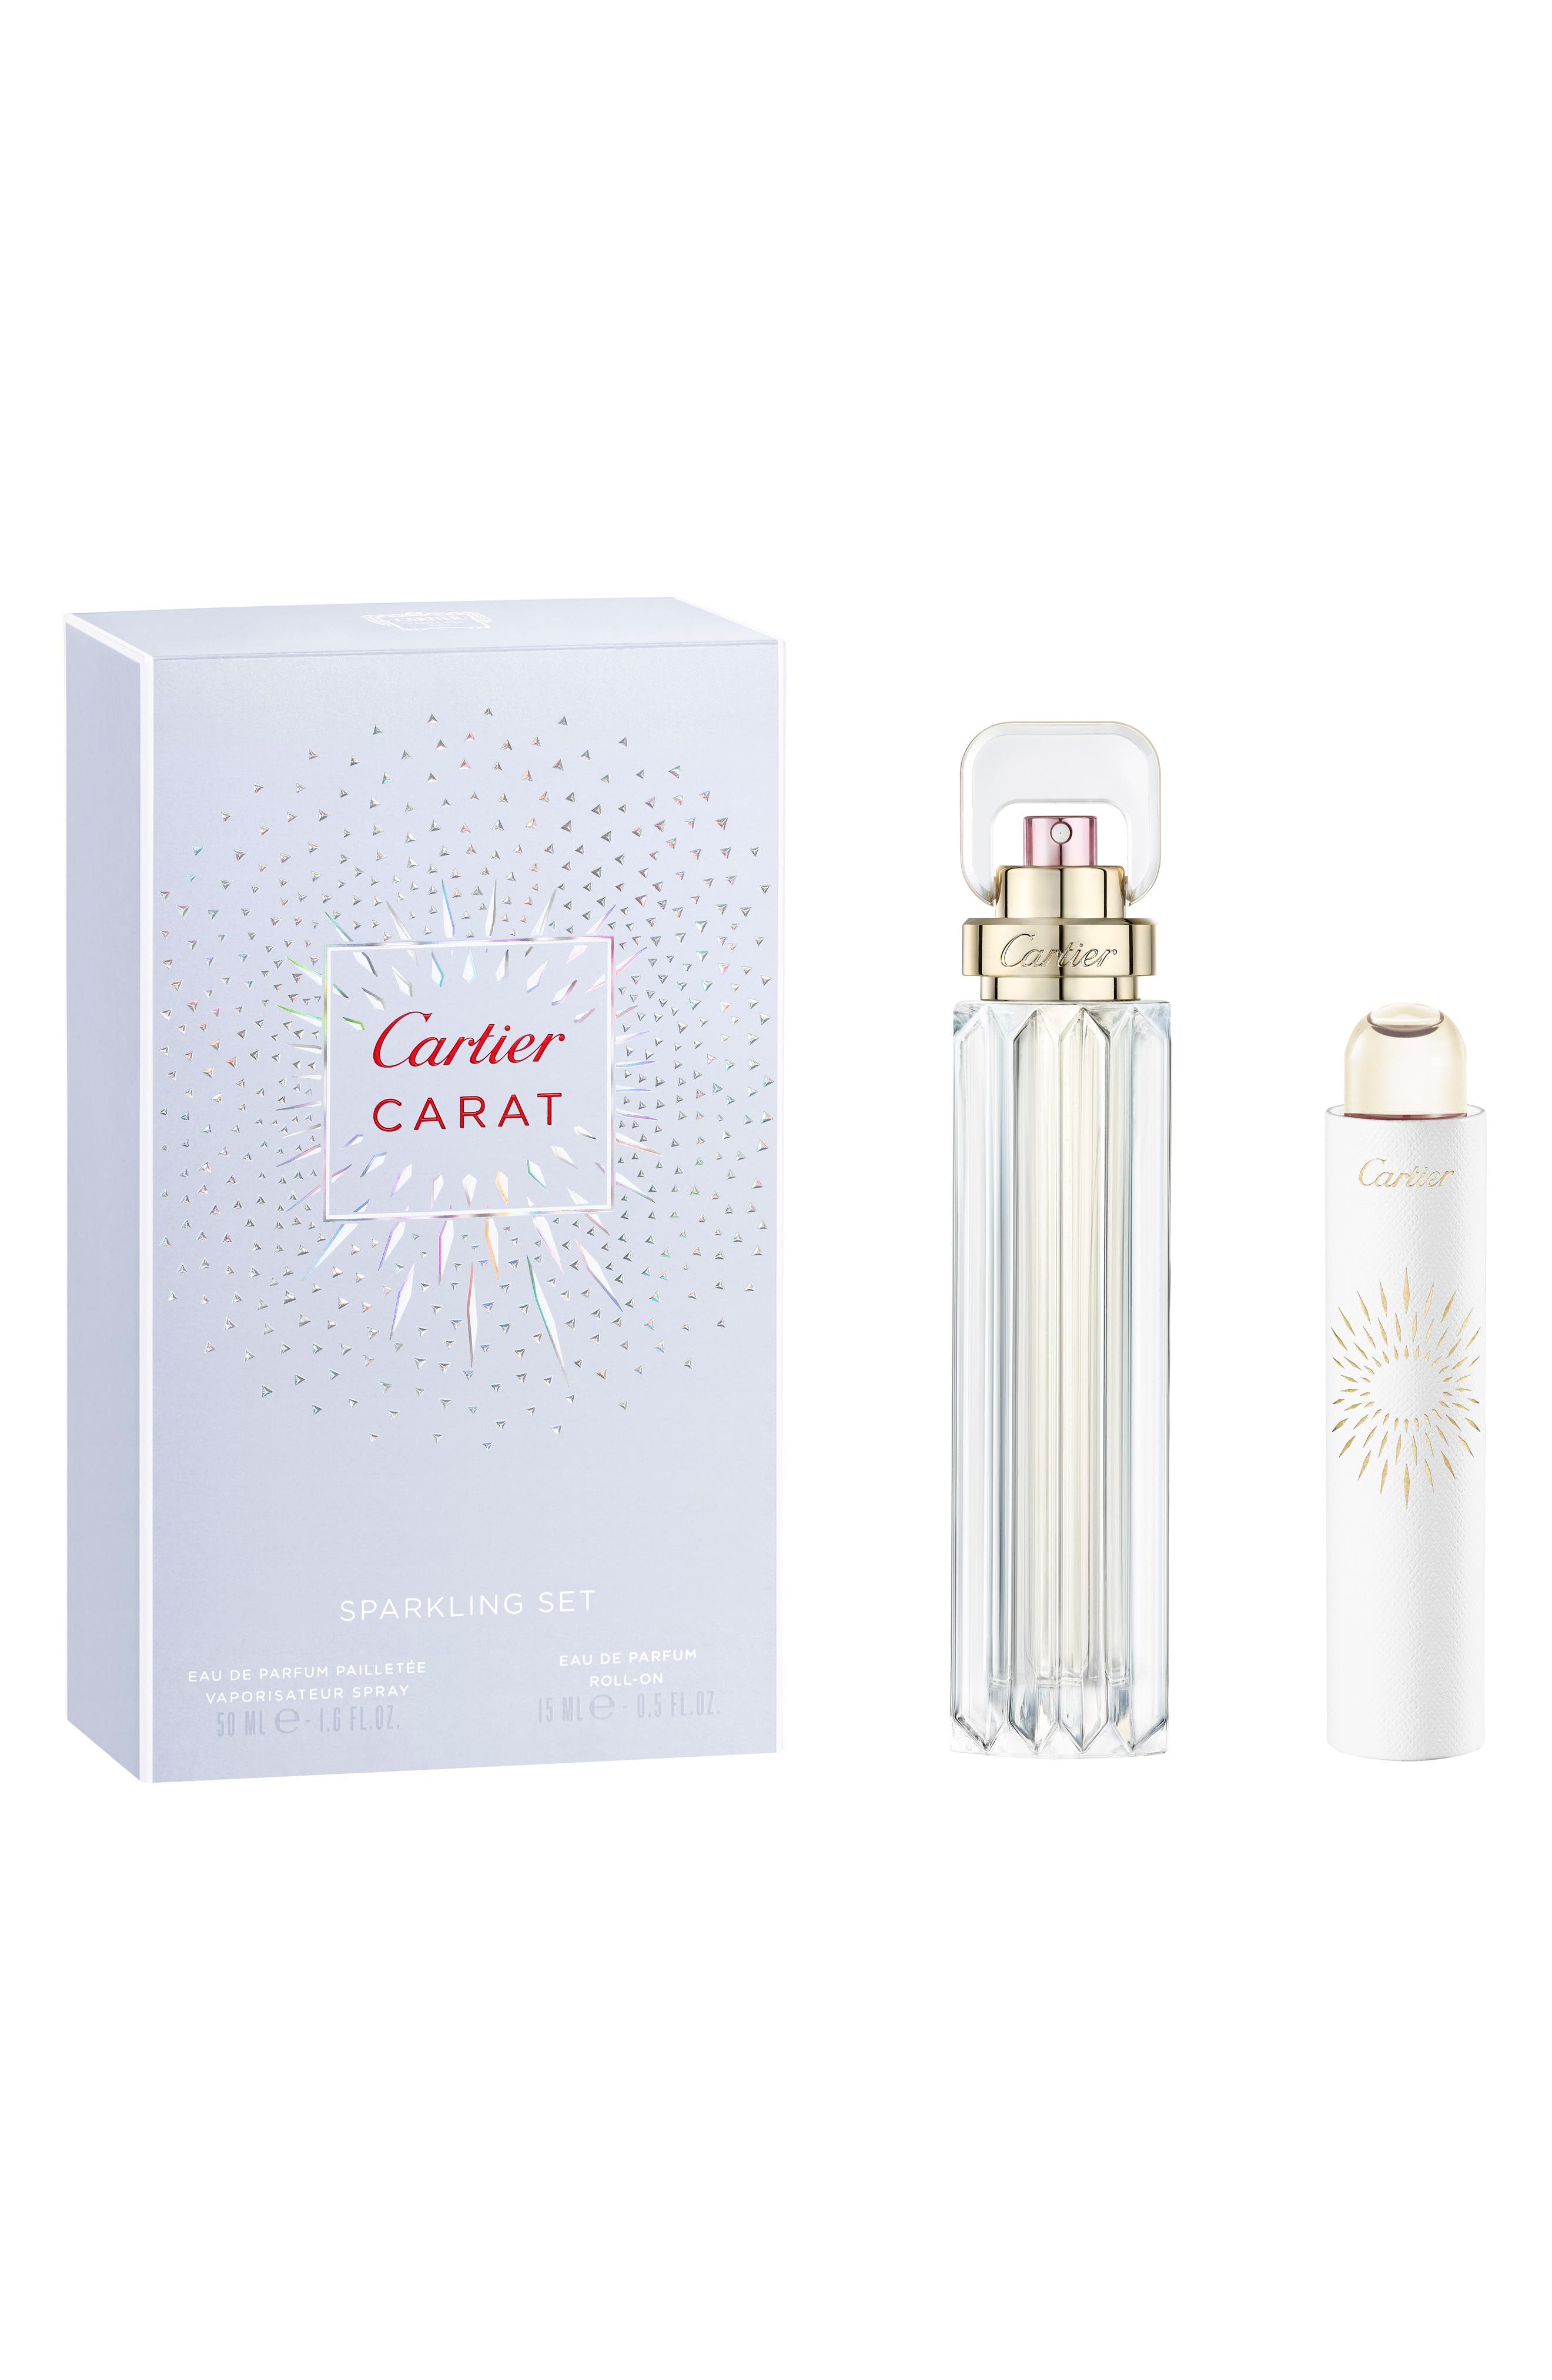 Cartier Beauty Gifts Under $100 | Nordstrom